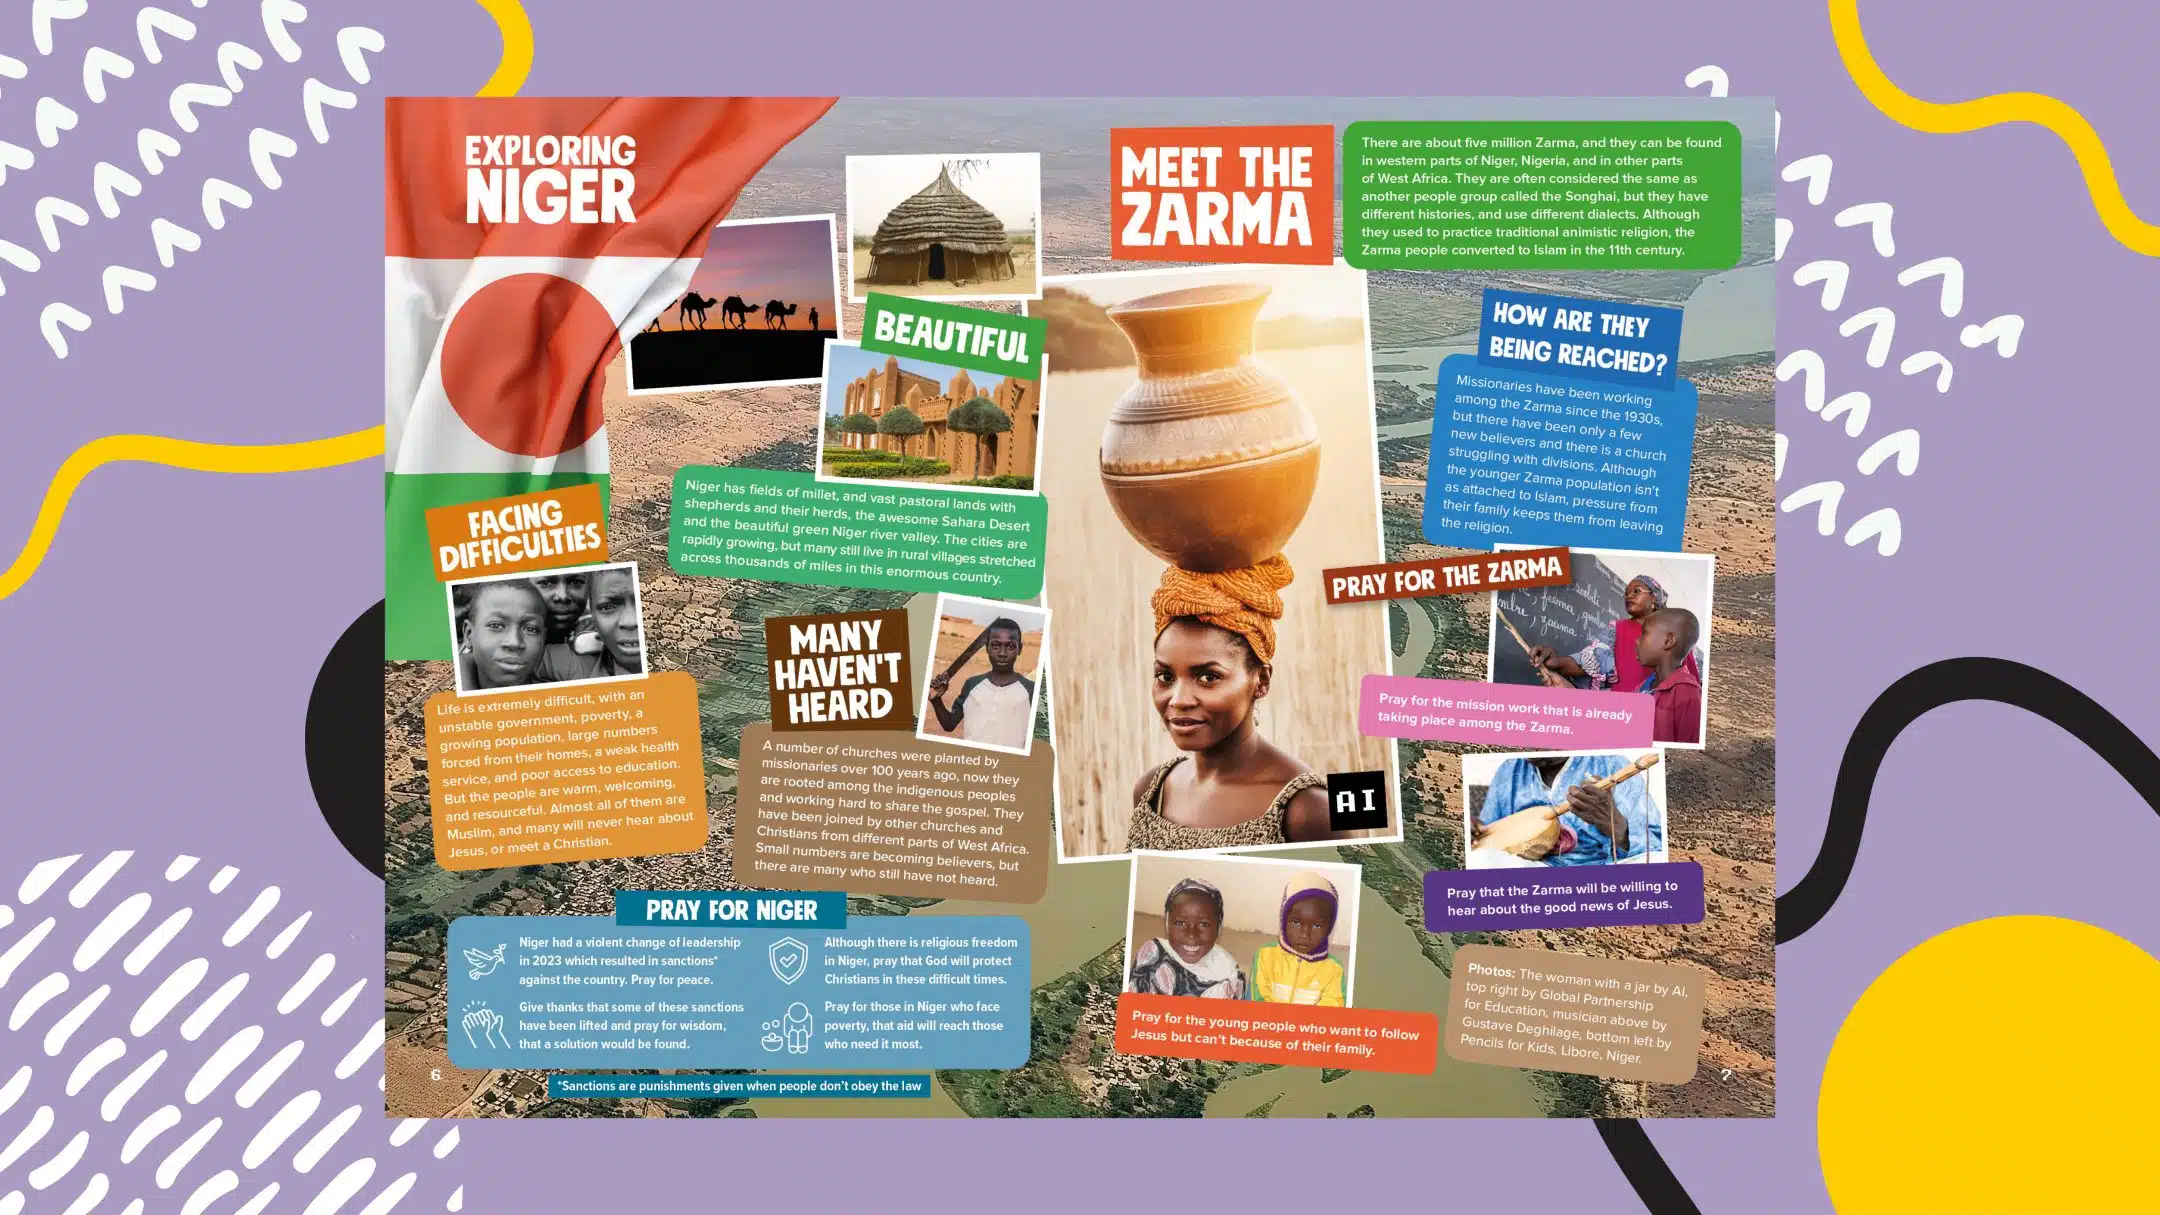 Explore Niger and meet the Zarma people